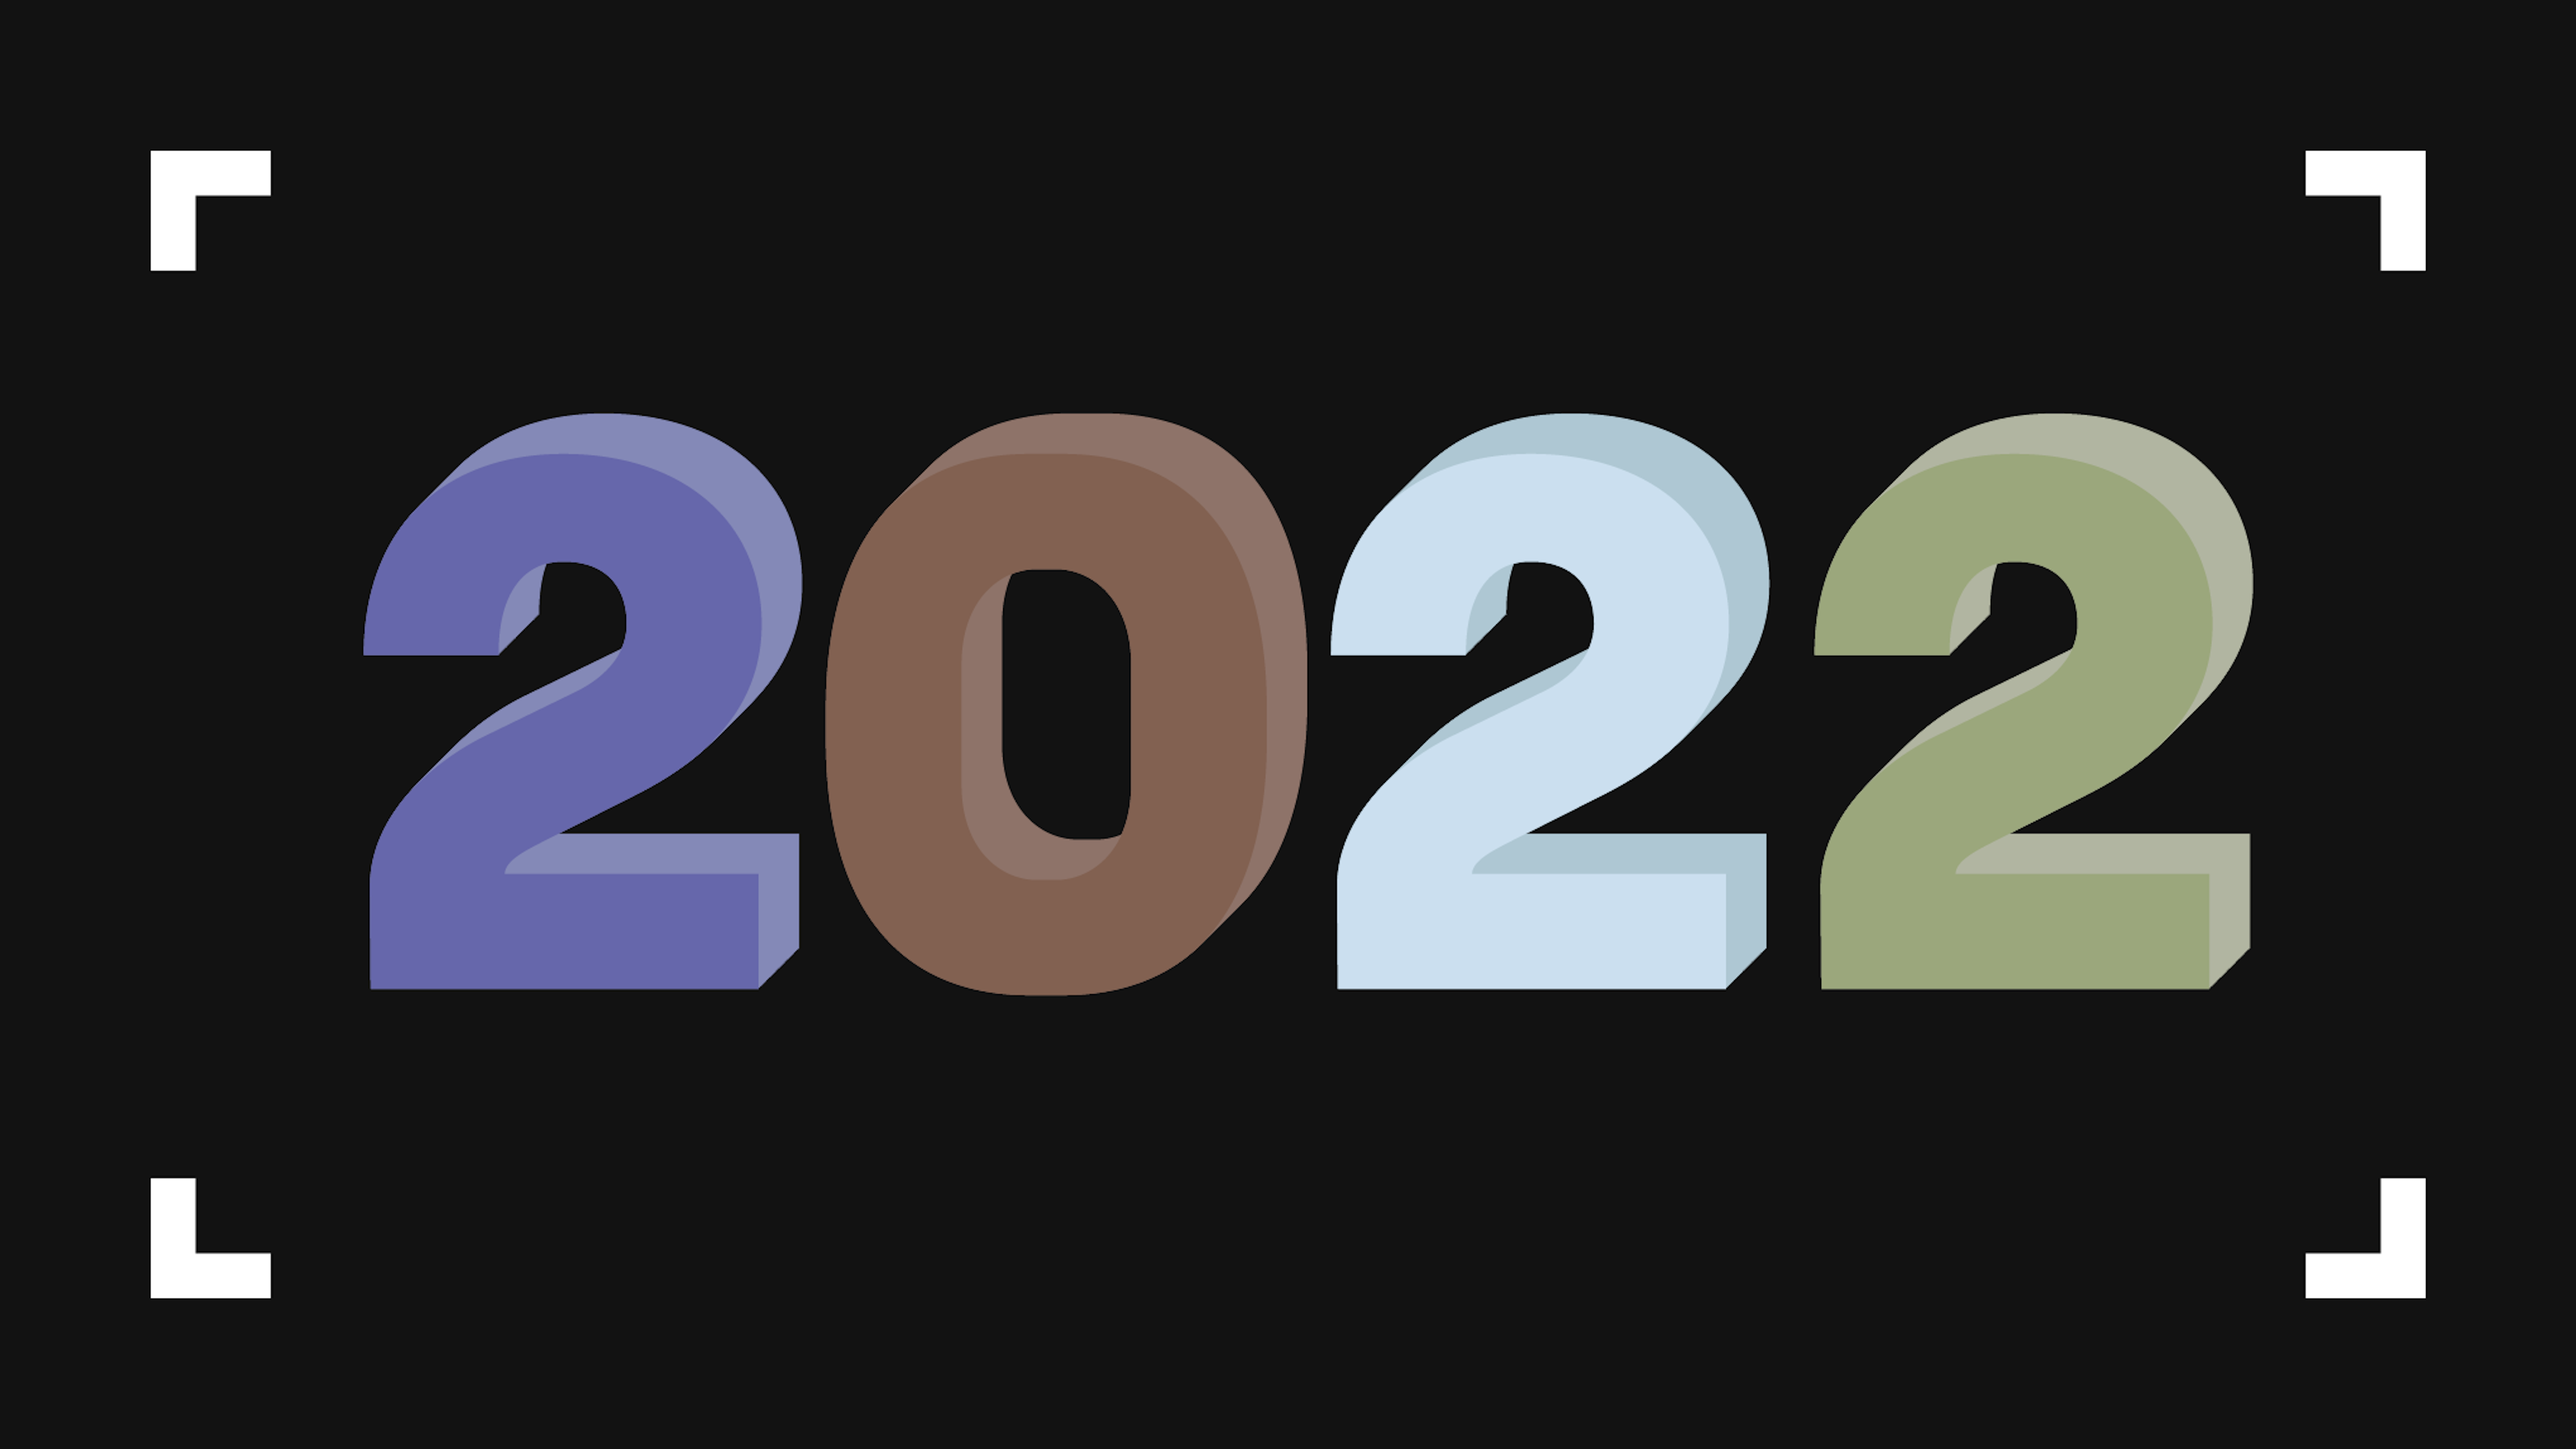 Every 2022 Colour Of The Year so far